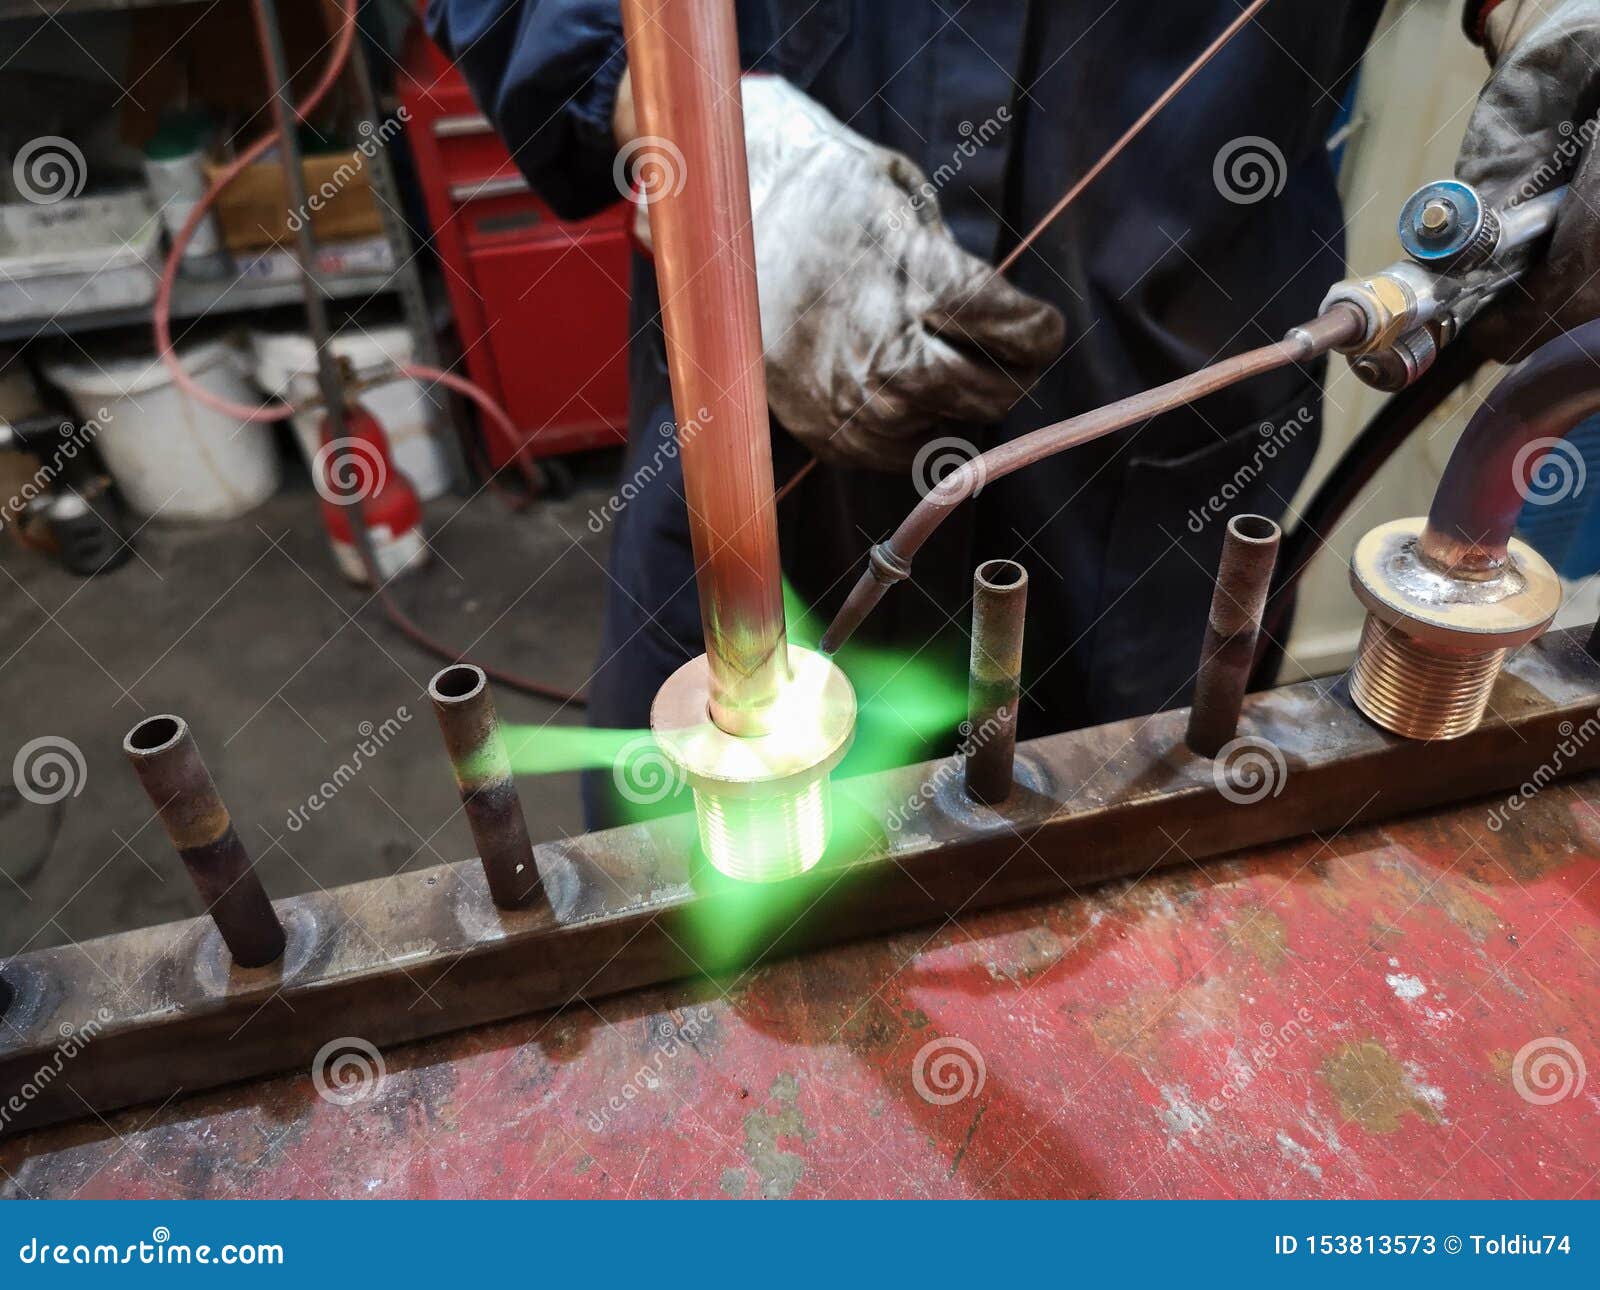 Soldering Of Brass Fittings On Copper Pipe Stock Image Image Of Industry Metal 153813573